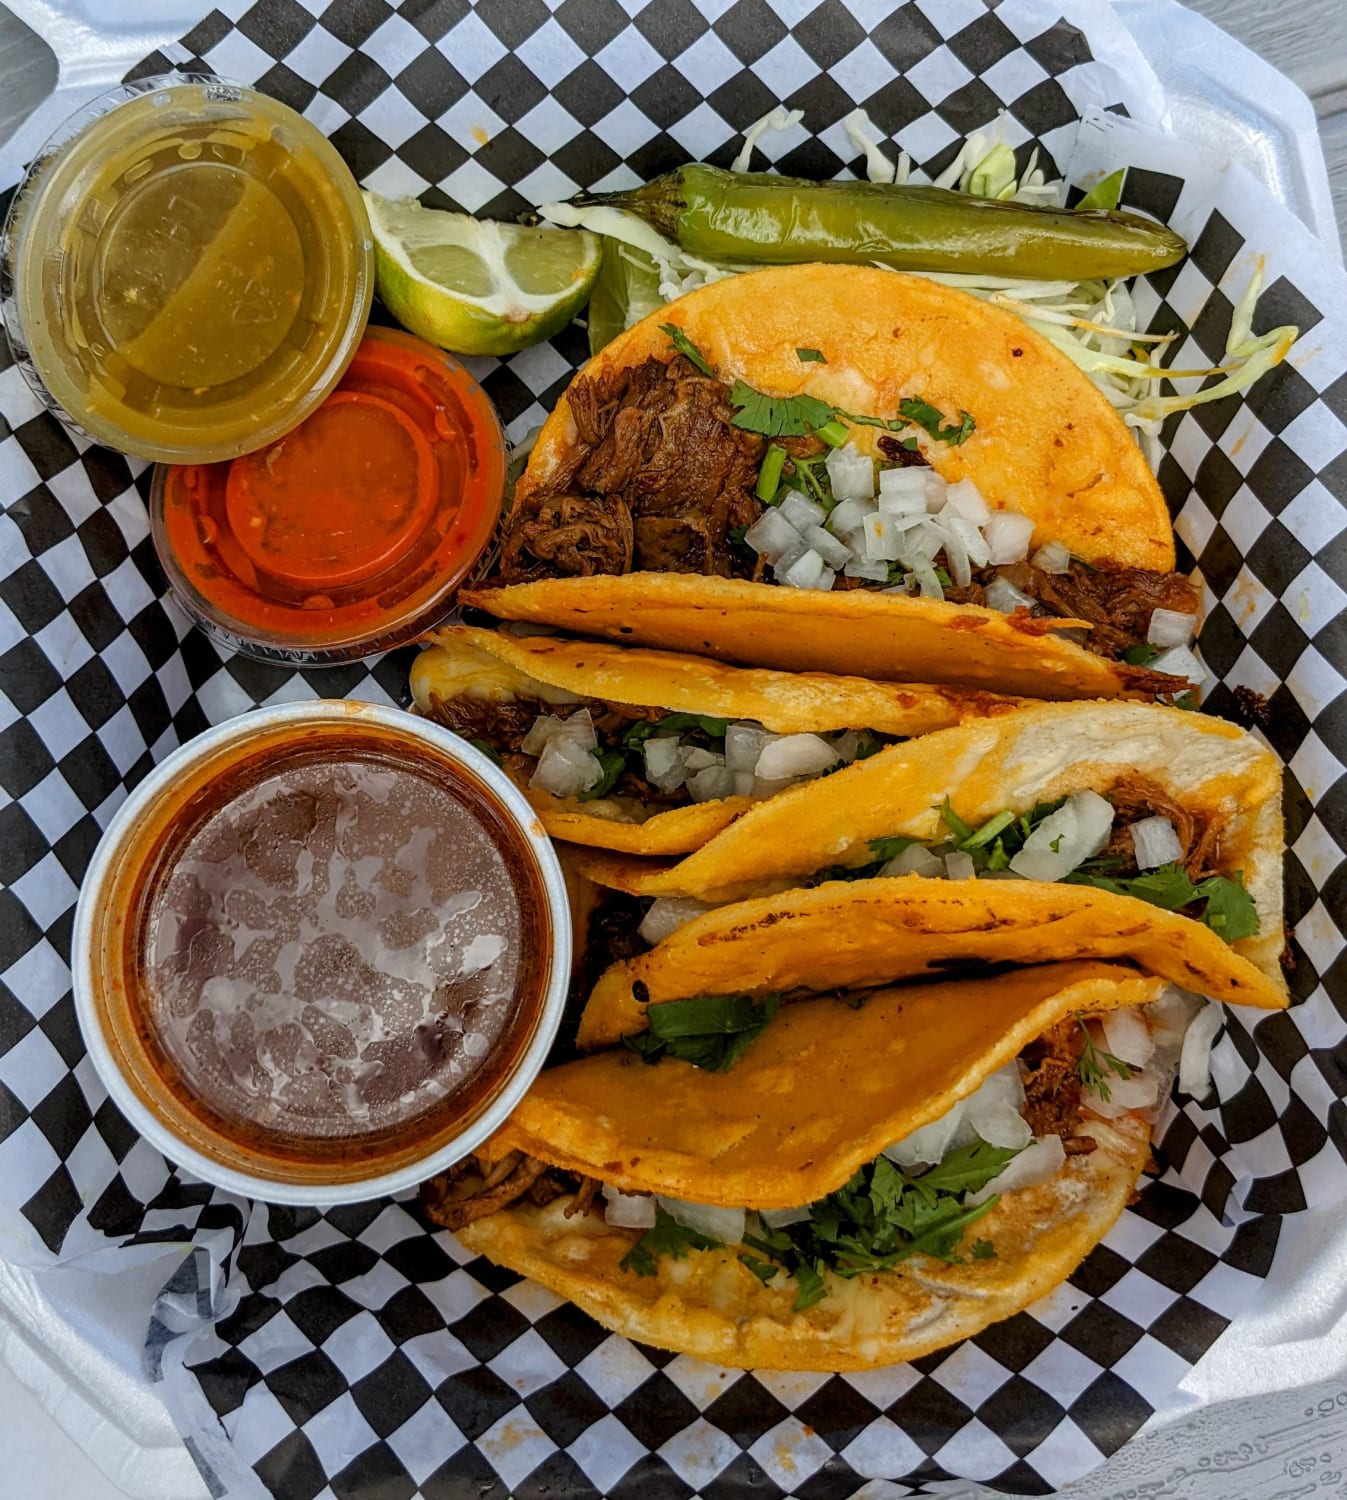 Quesabirria tacos from my local food truck.